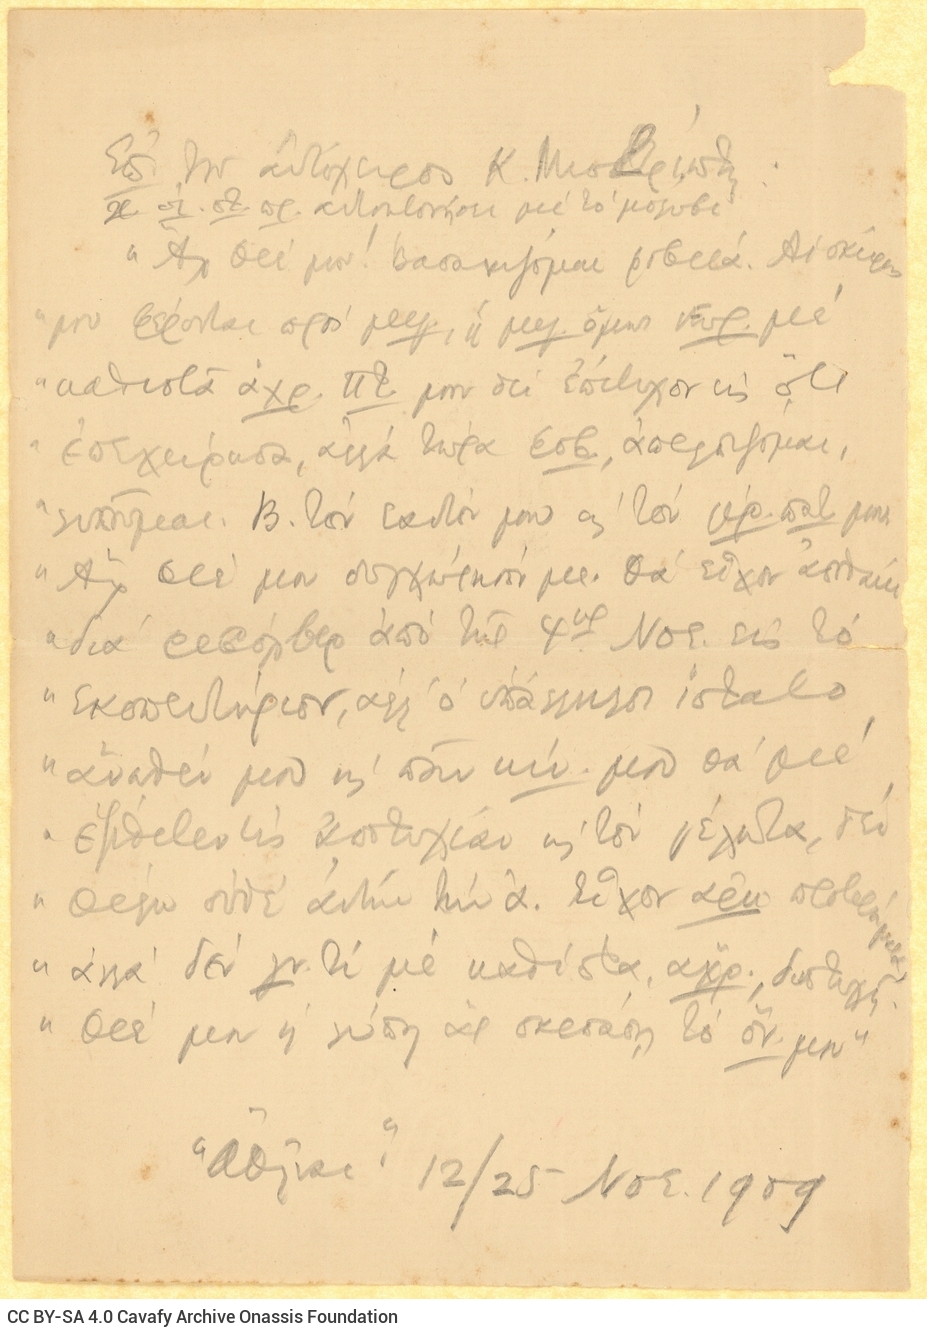 Handwritten note with a quote from the newspaper *Athinai* of 12/25 November 1909, on one side of a sheet. It pertains to 